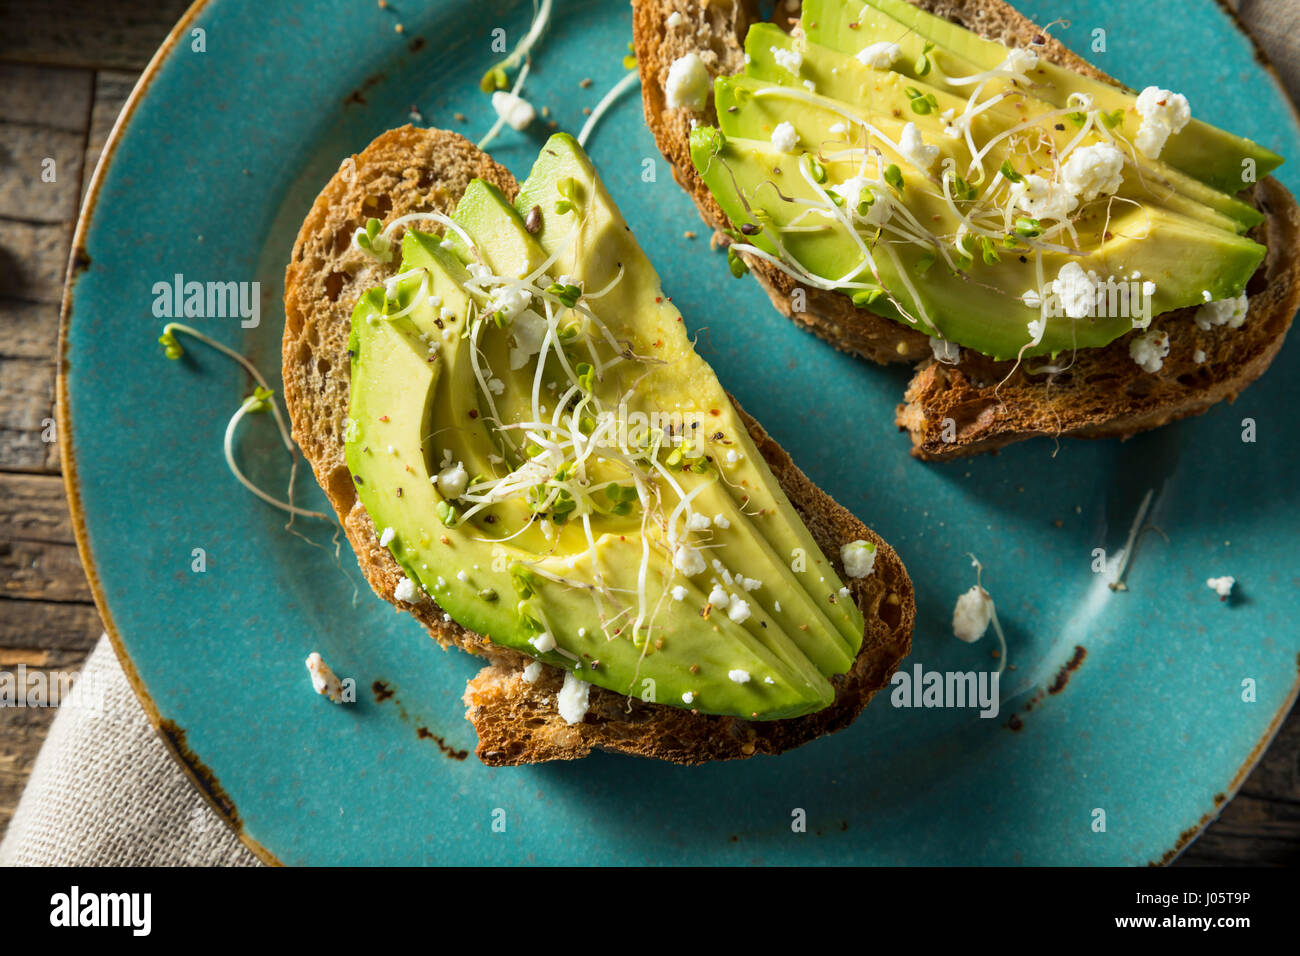 Healthy Homemade Avocado Toast with Cheese and Sprouts Stock Photo